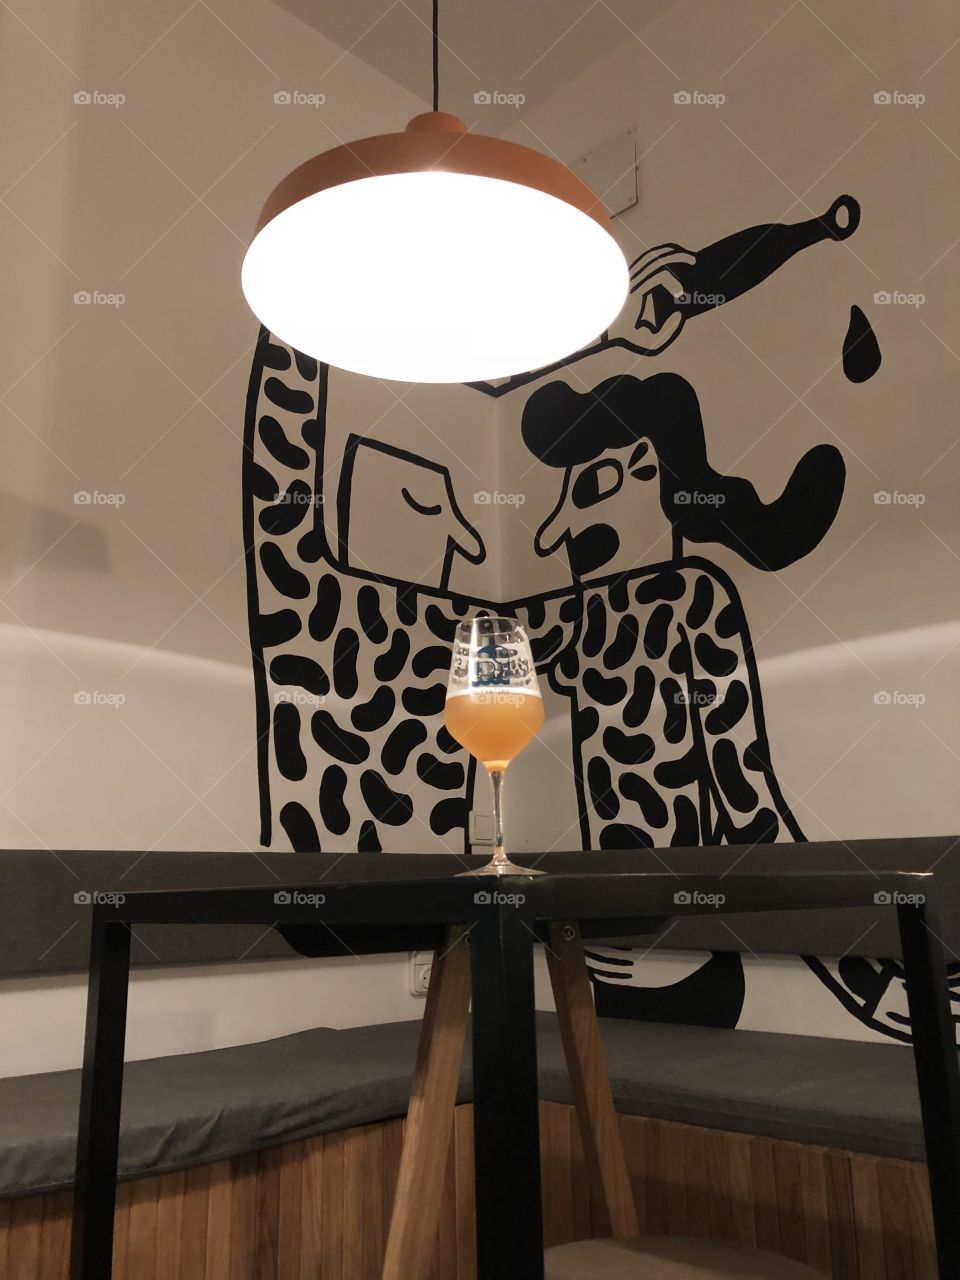 Beer with illustration wall art